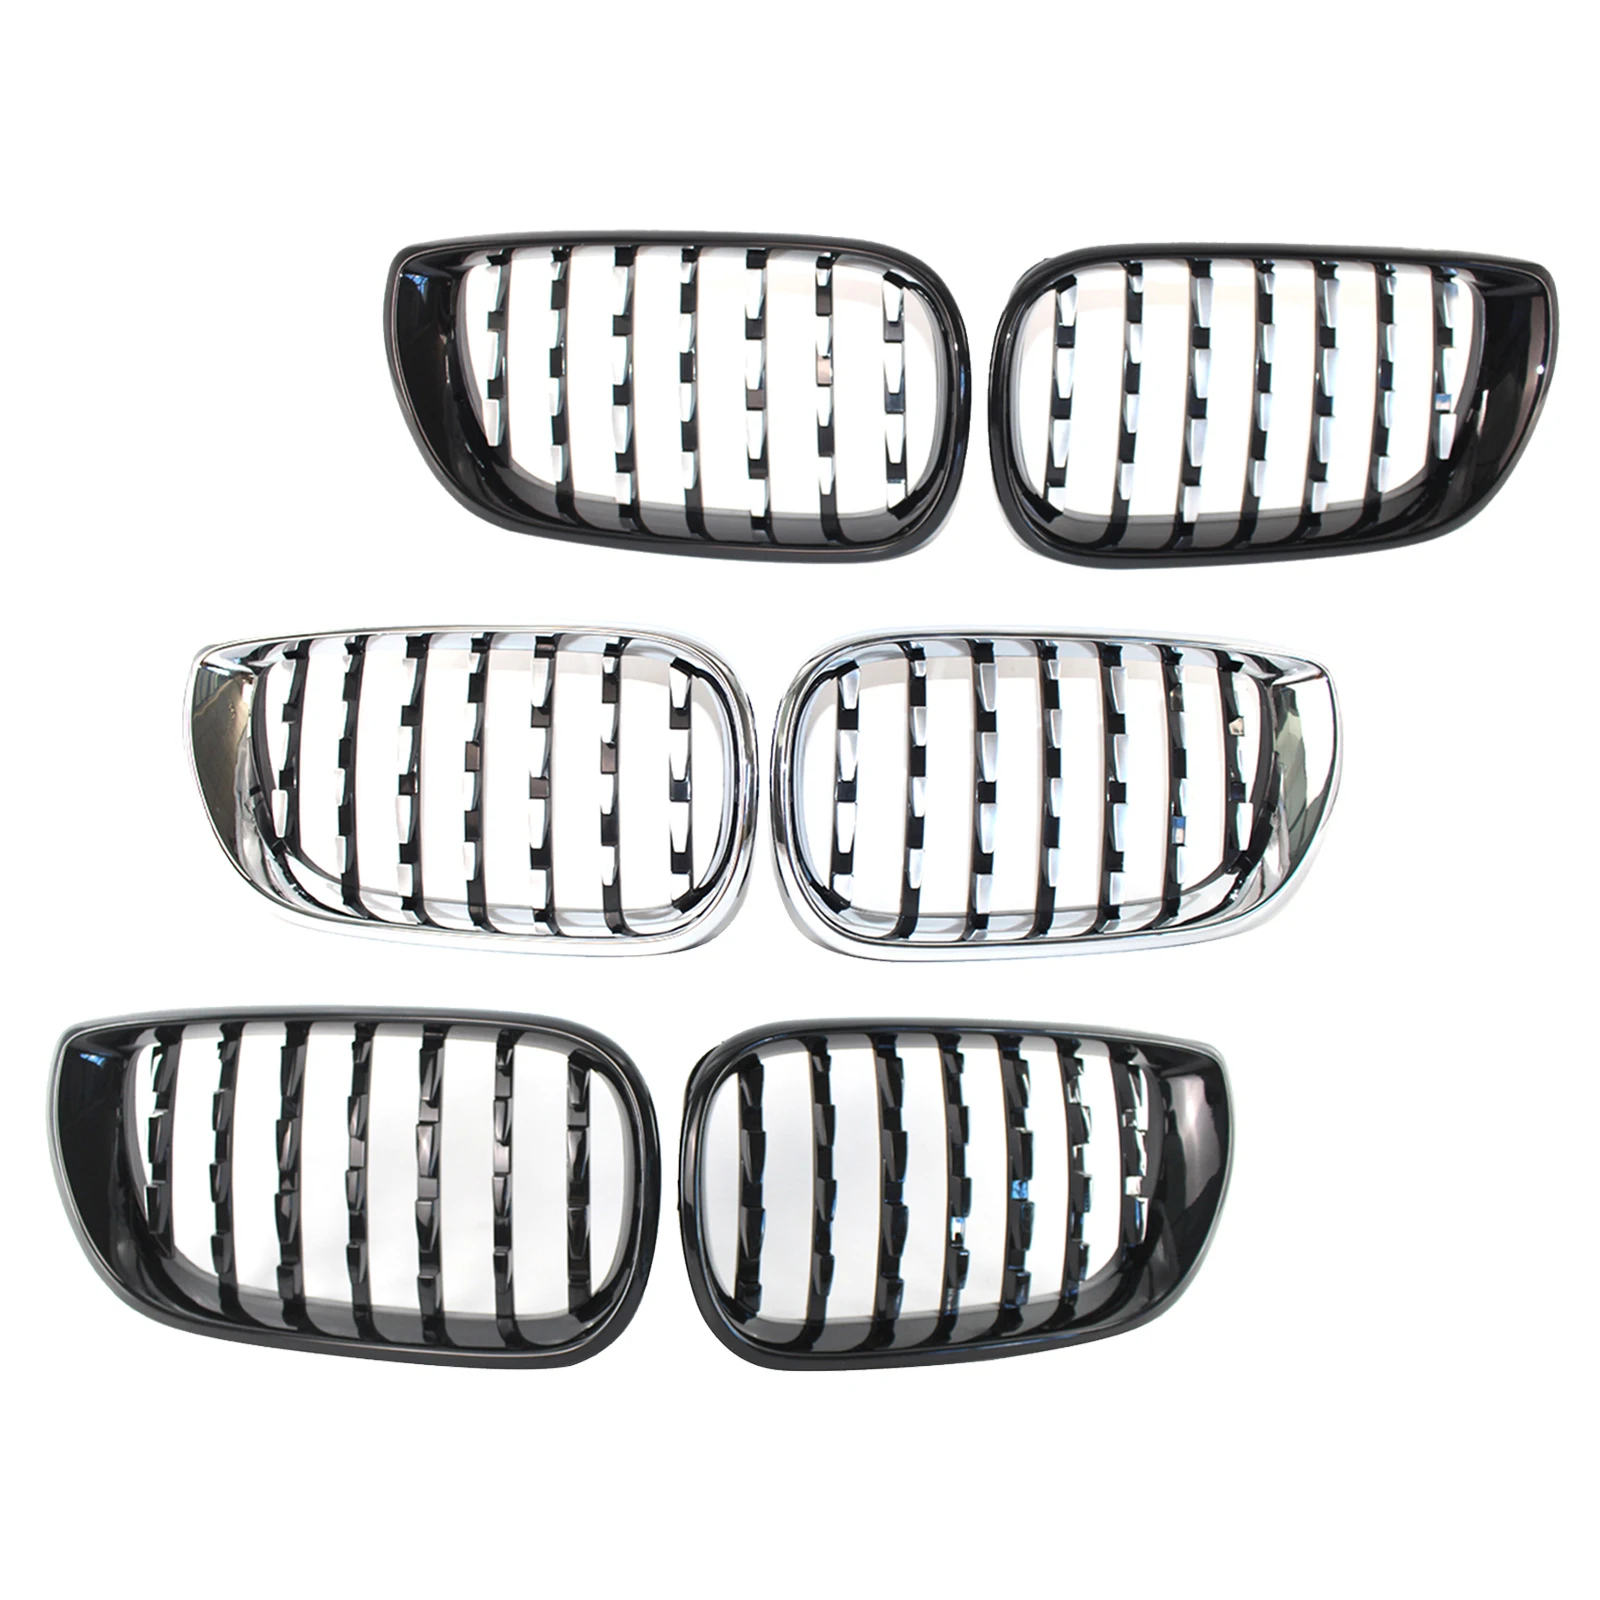 1 Pair Auto Front Kidney Grille Fit for BMW 3 Series E46 4-door 2002-2005